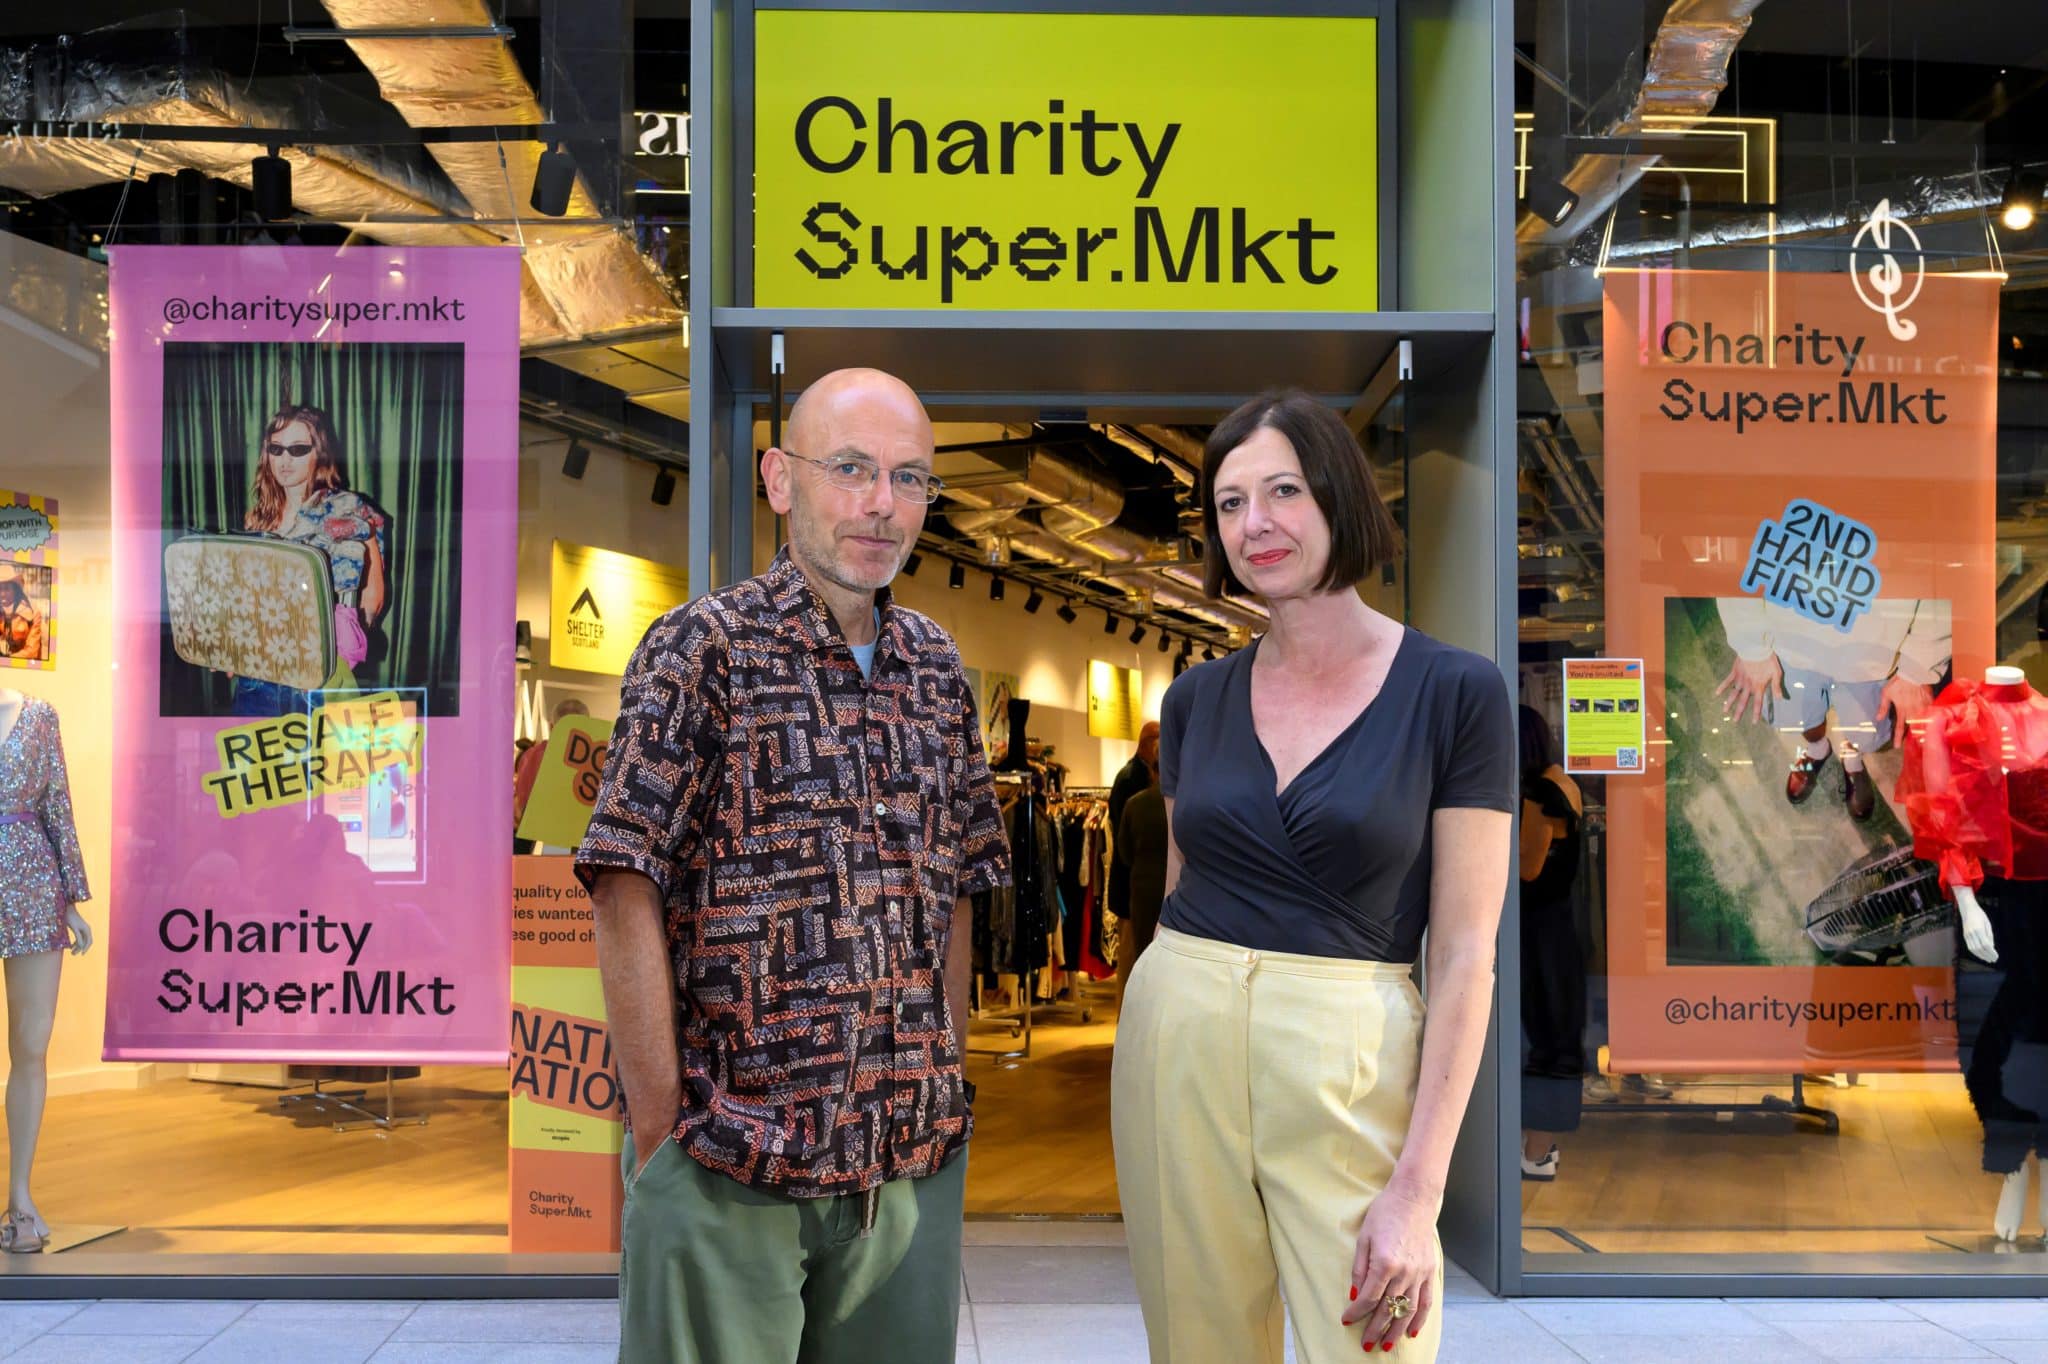 charity-supermkt-mediacity-shop-exterior-owners-people